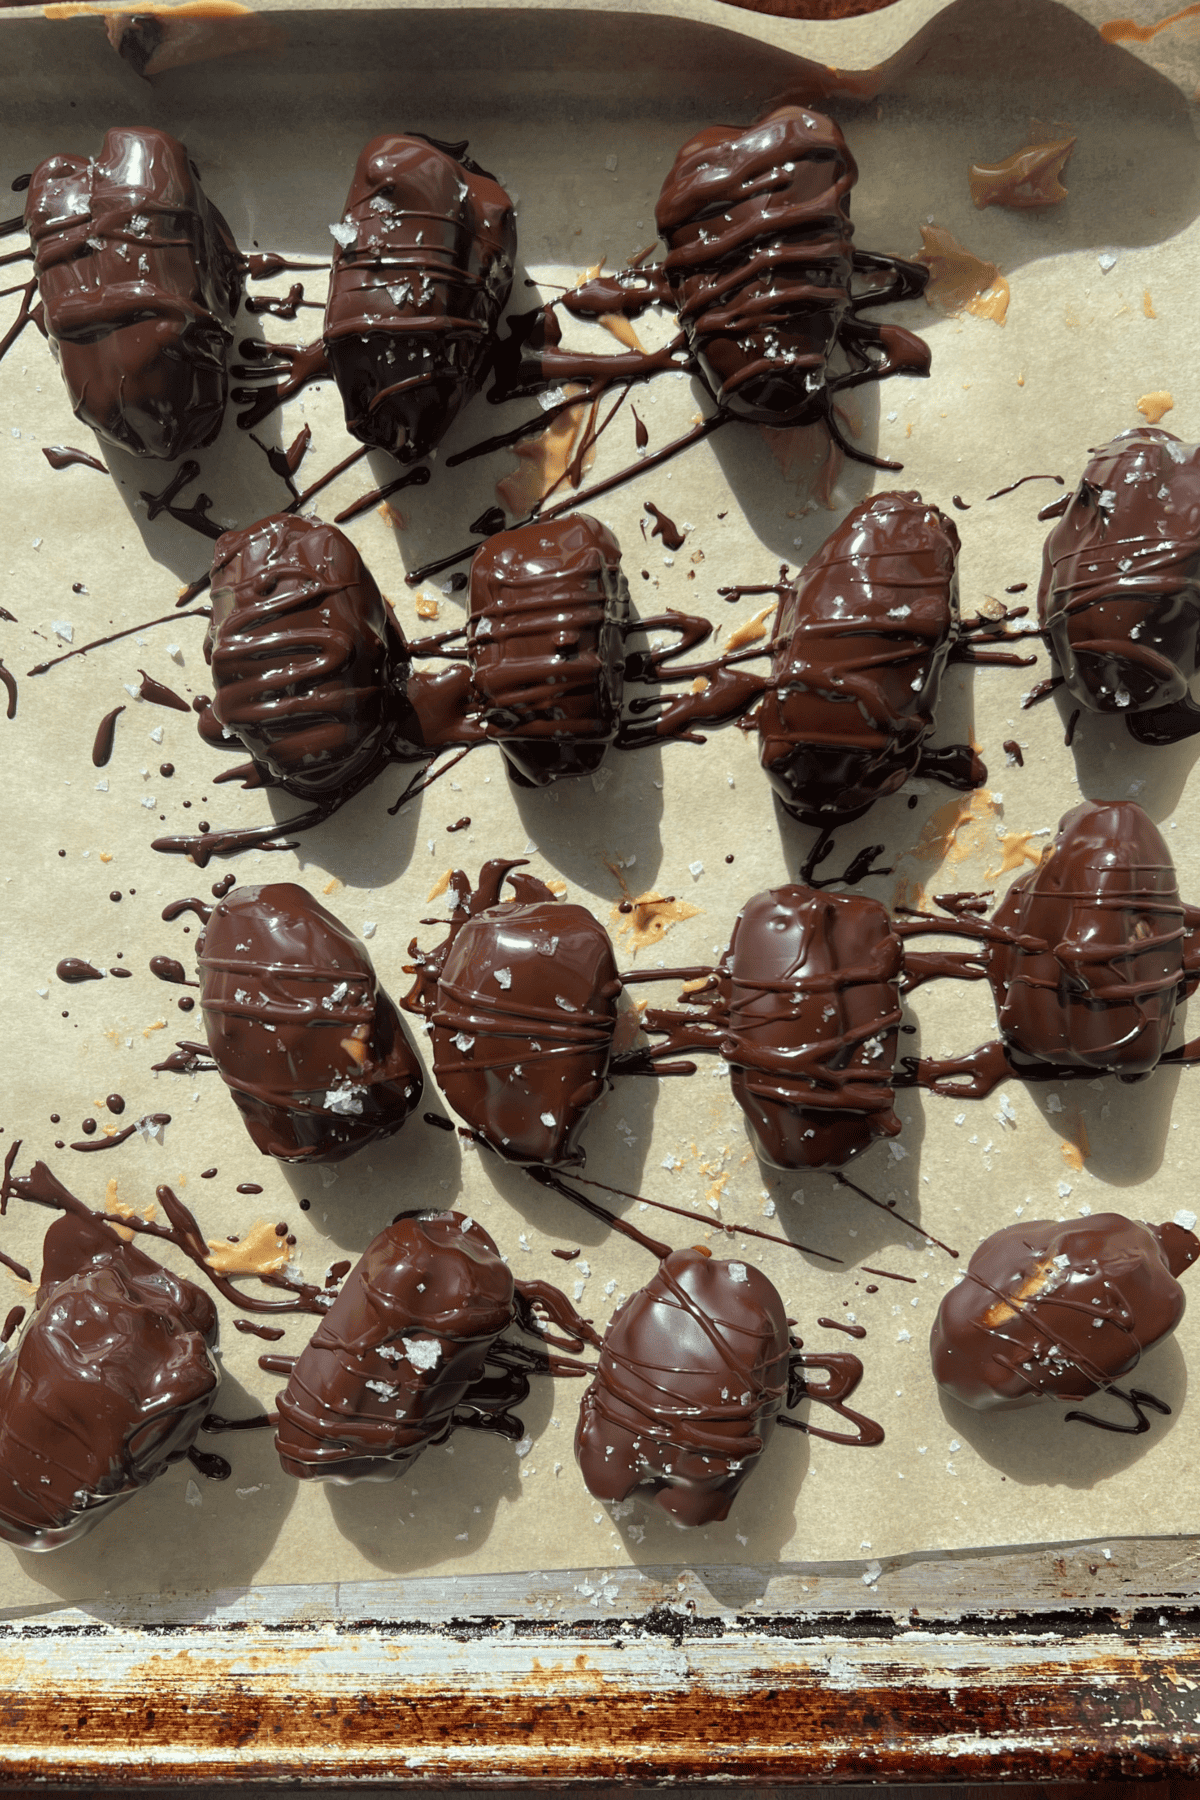 snickers stuffed chocolate covered dates on a sheet pan lined with parchment paper